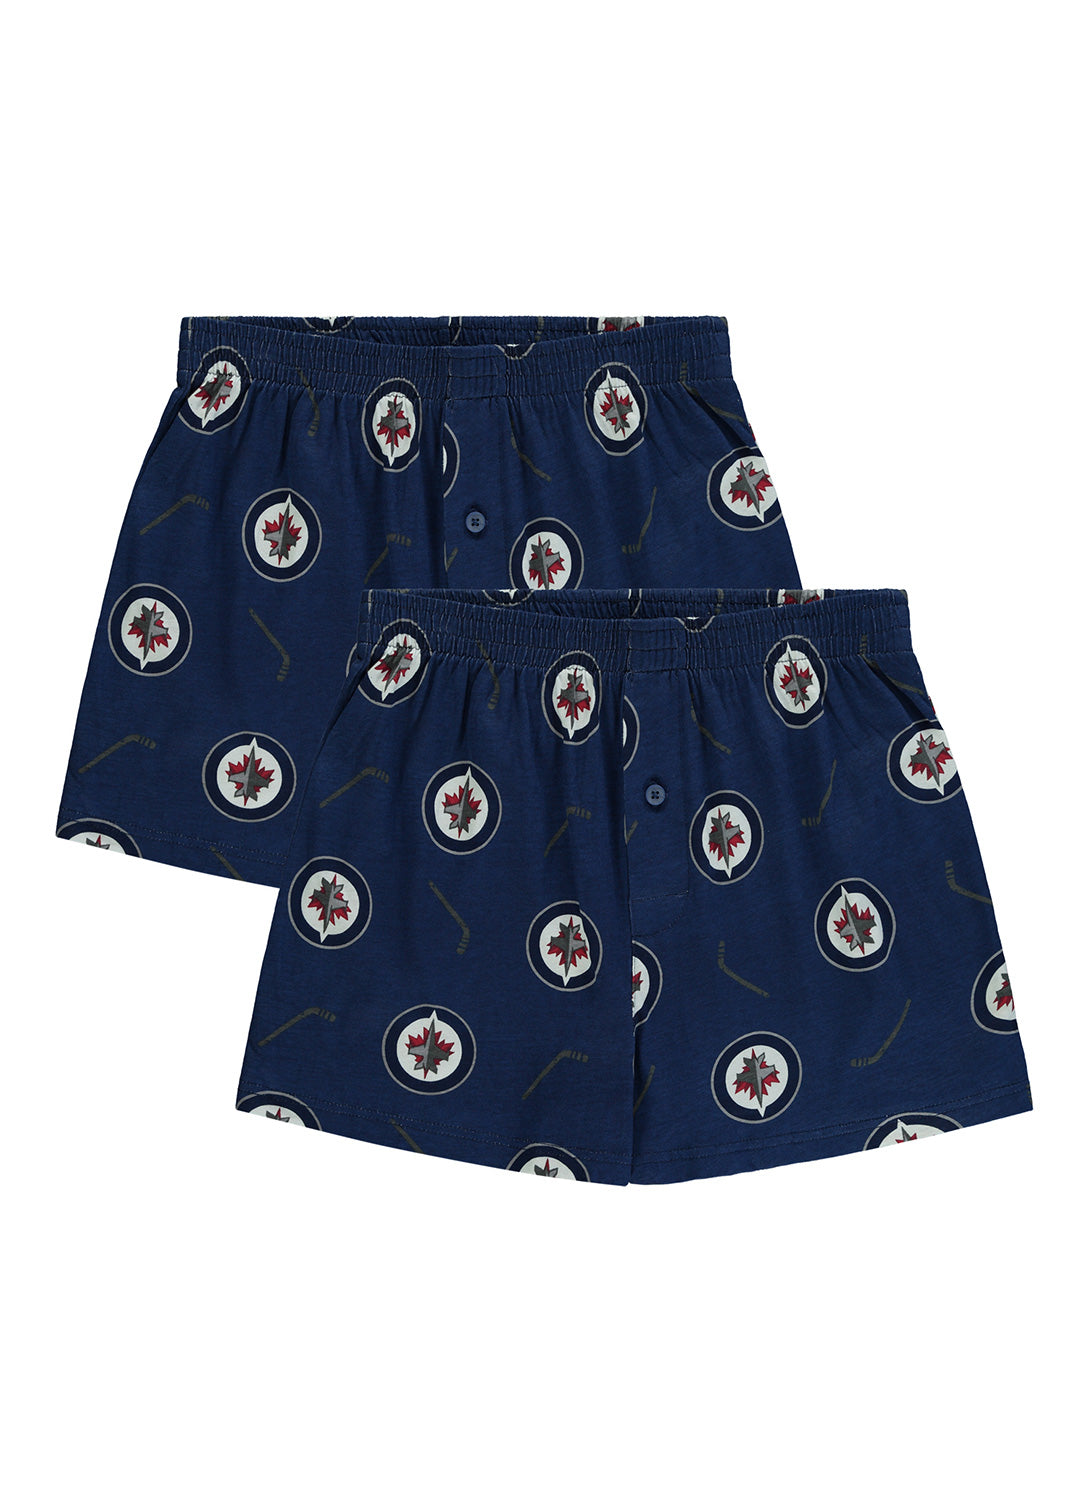 Pair of mens boxers with Winnipeg Jets print (navy)